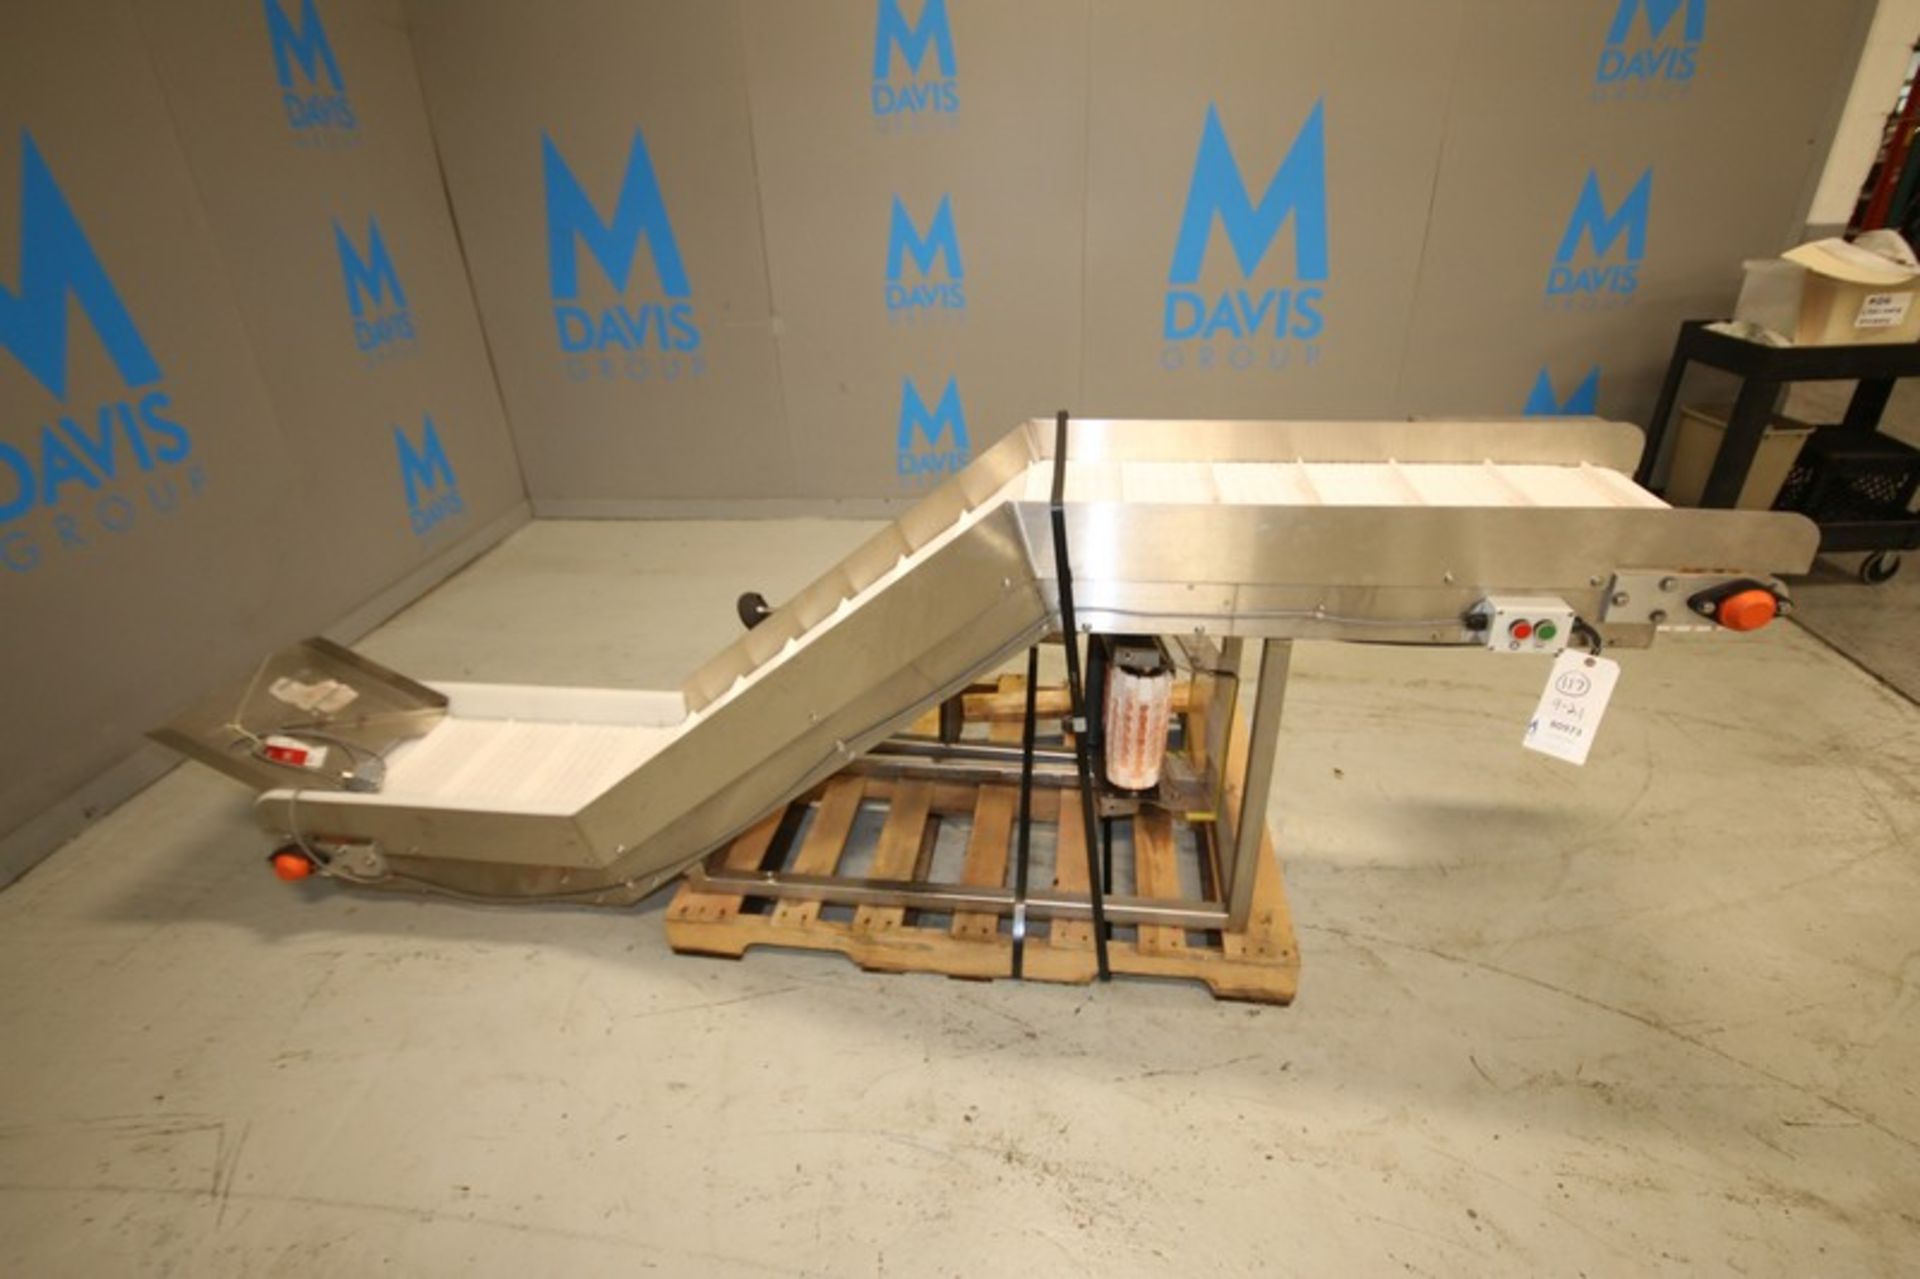 Universal Packaging Inc Aprox 9' L x 30" H x 18" W S/S Inclined Conveyor, Model TC.18.72 M, SN 1736,